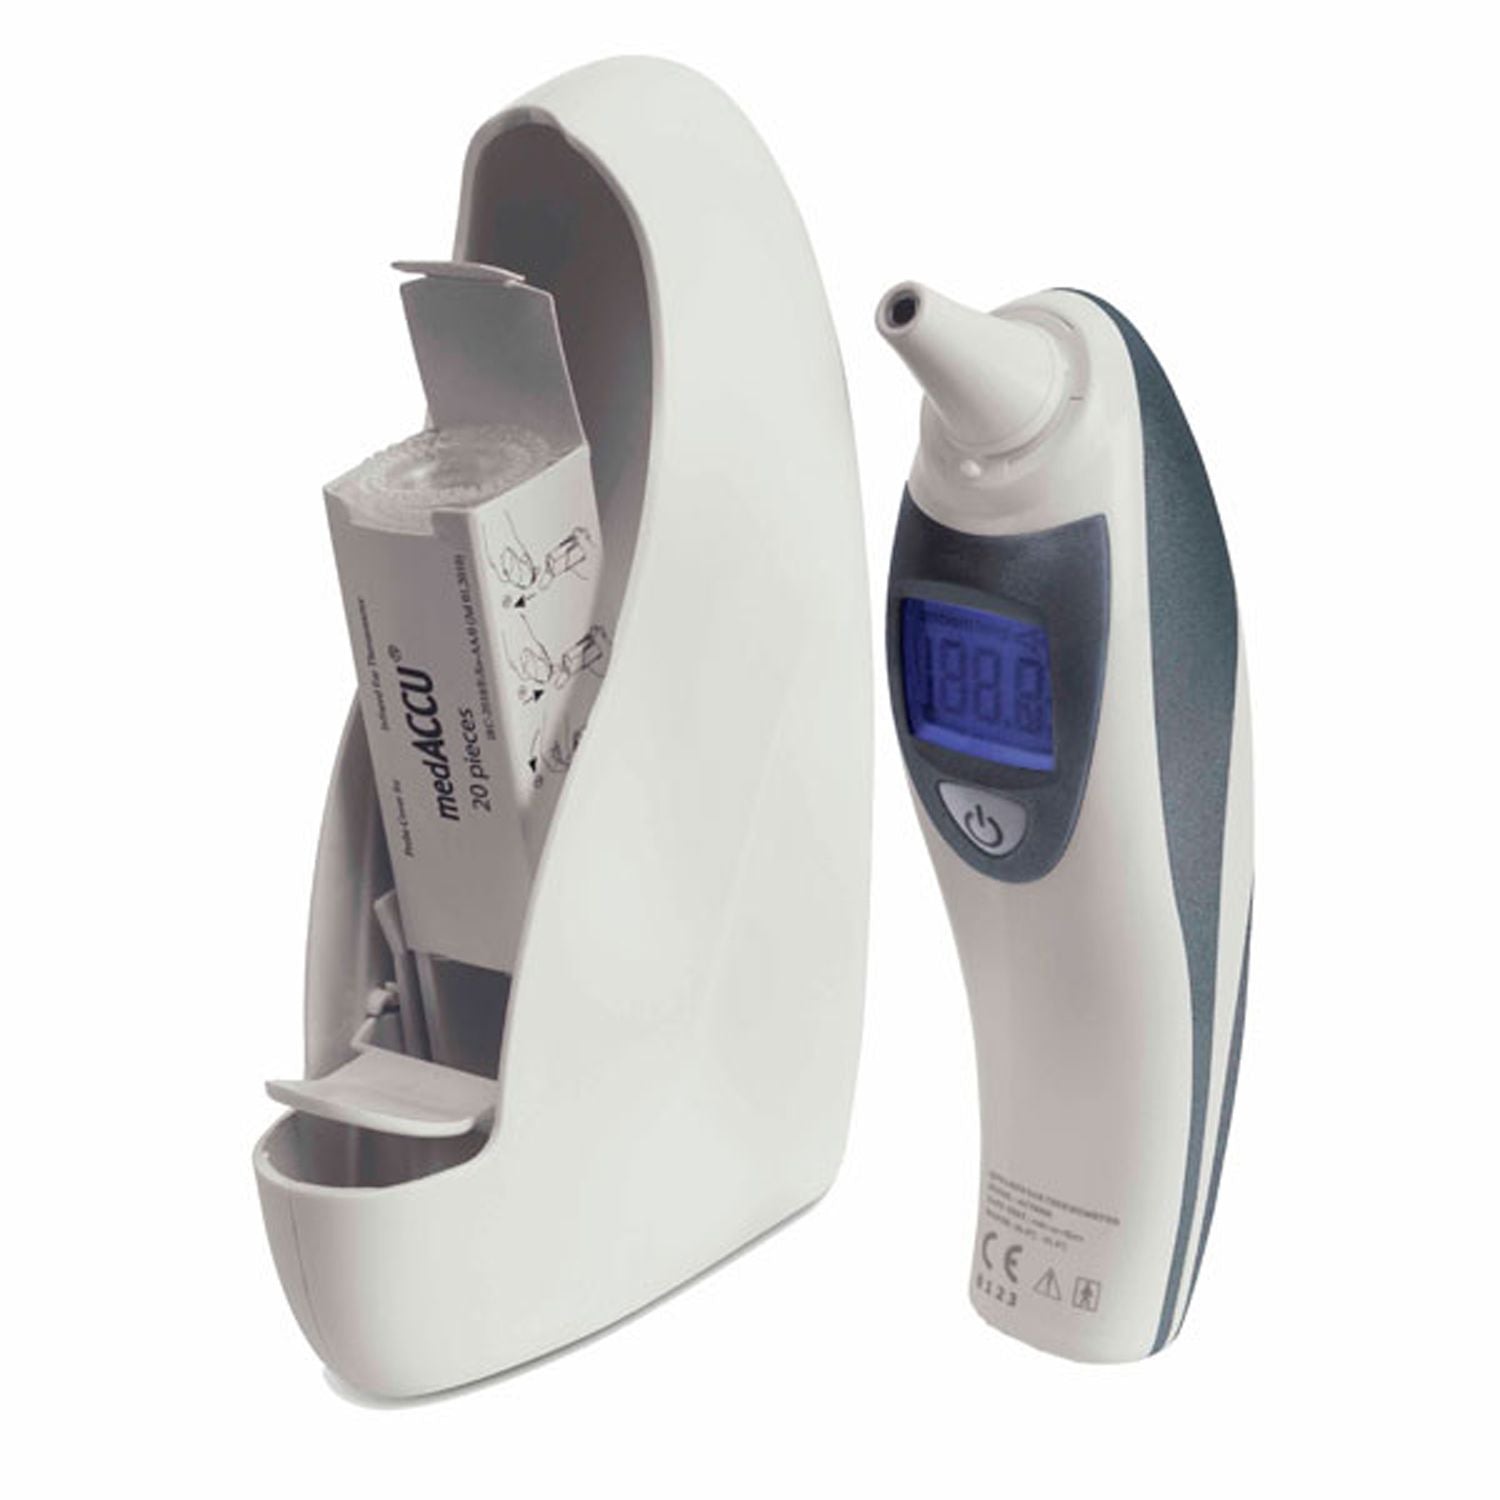 Professional Digital Tympanic Thermometer with Cradle